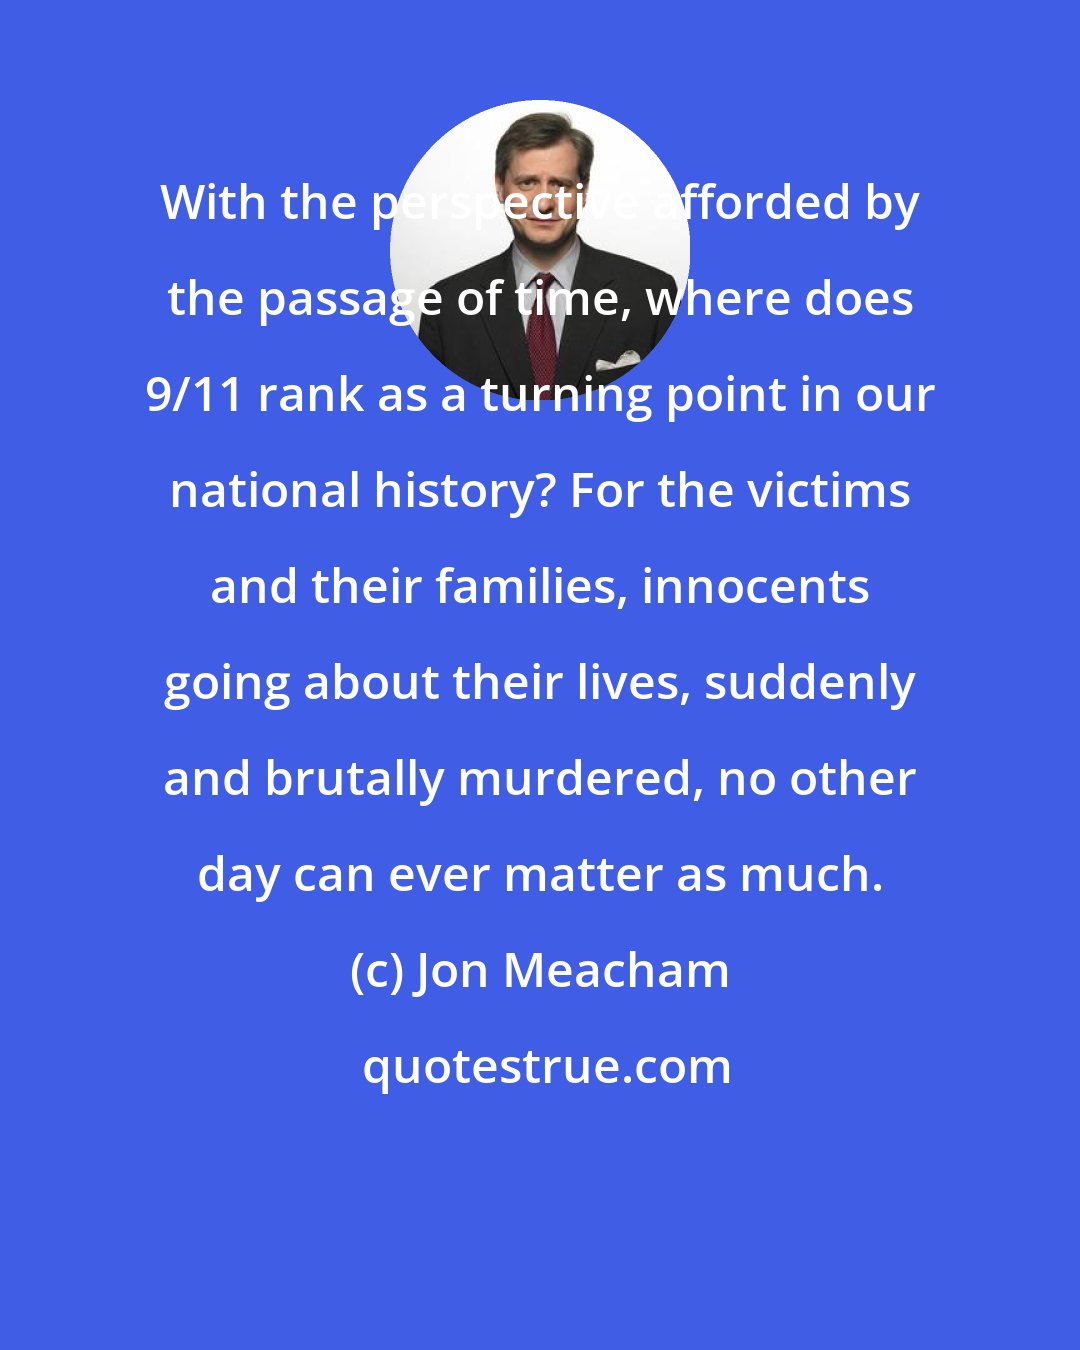 Jon Meacham: With the perspective afforded by the passage of time, where does 9/11 rank as a turning point in our national history? For the victims and their families, innocents going about their lives, suddenly and brutally murdered, no other day can ever matter as much.